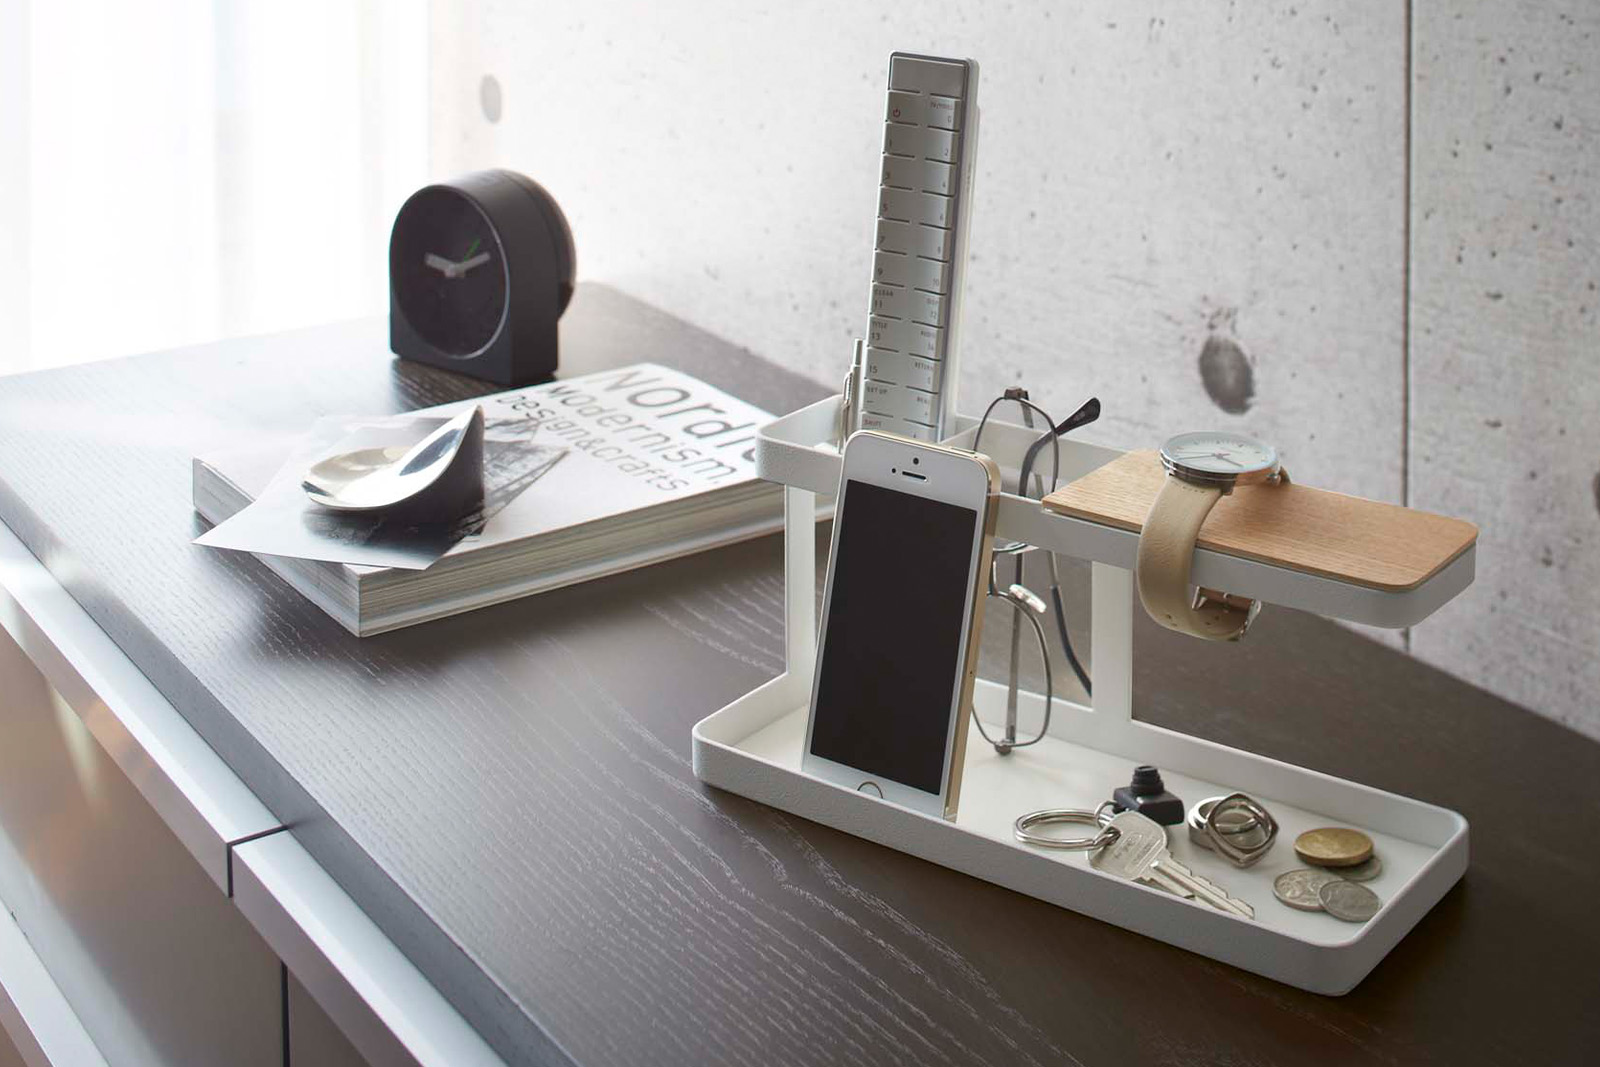 Yamazaki Home Desk Organizer holding a smart phone and a key board and a watch on the table. 